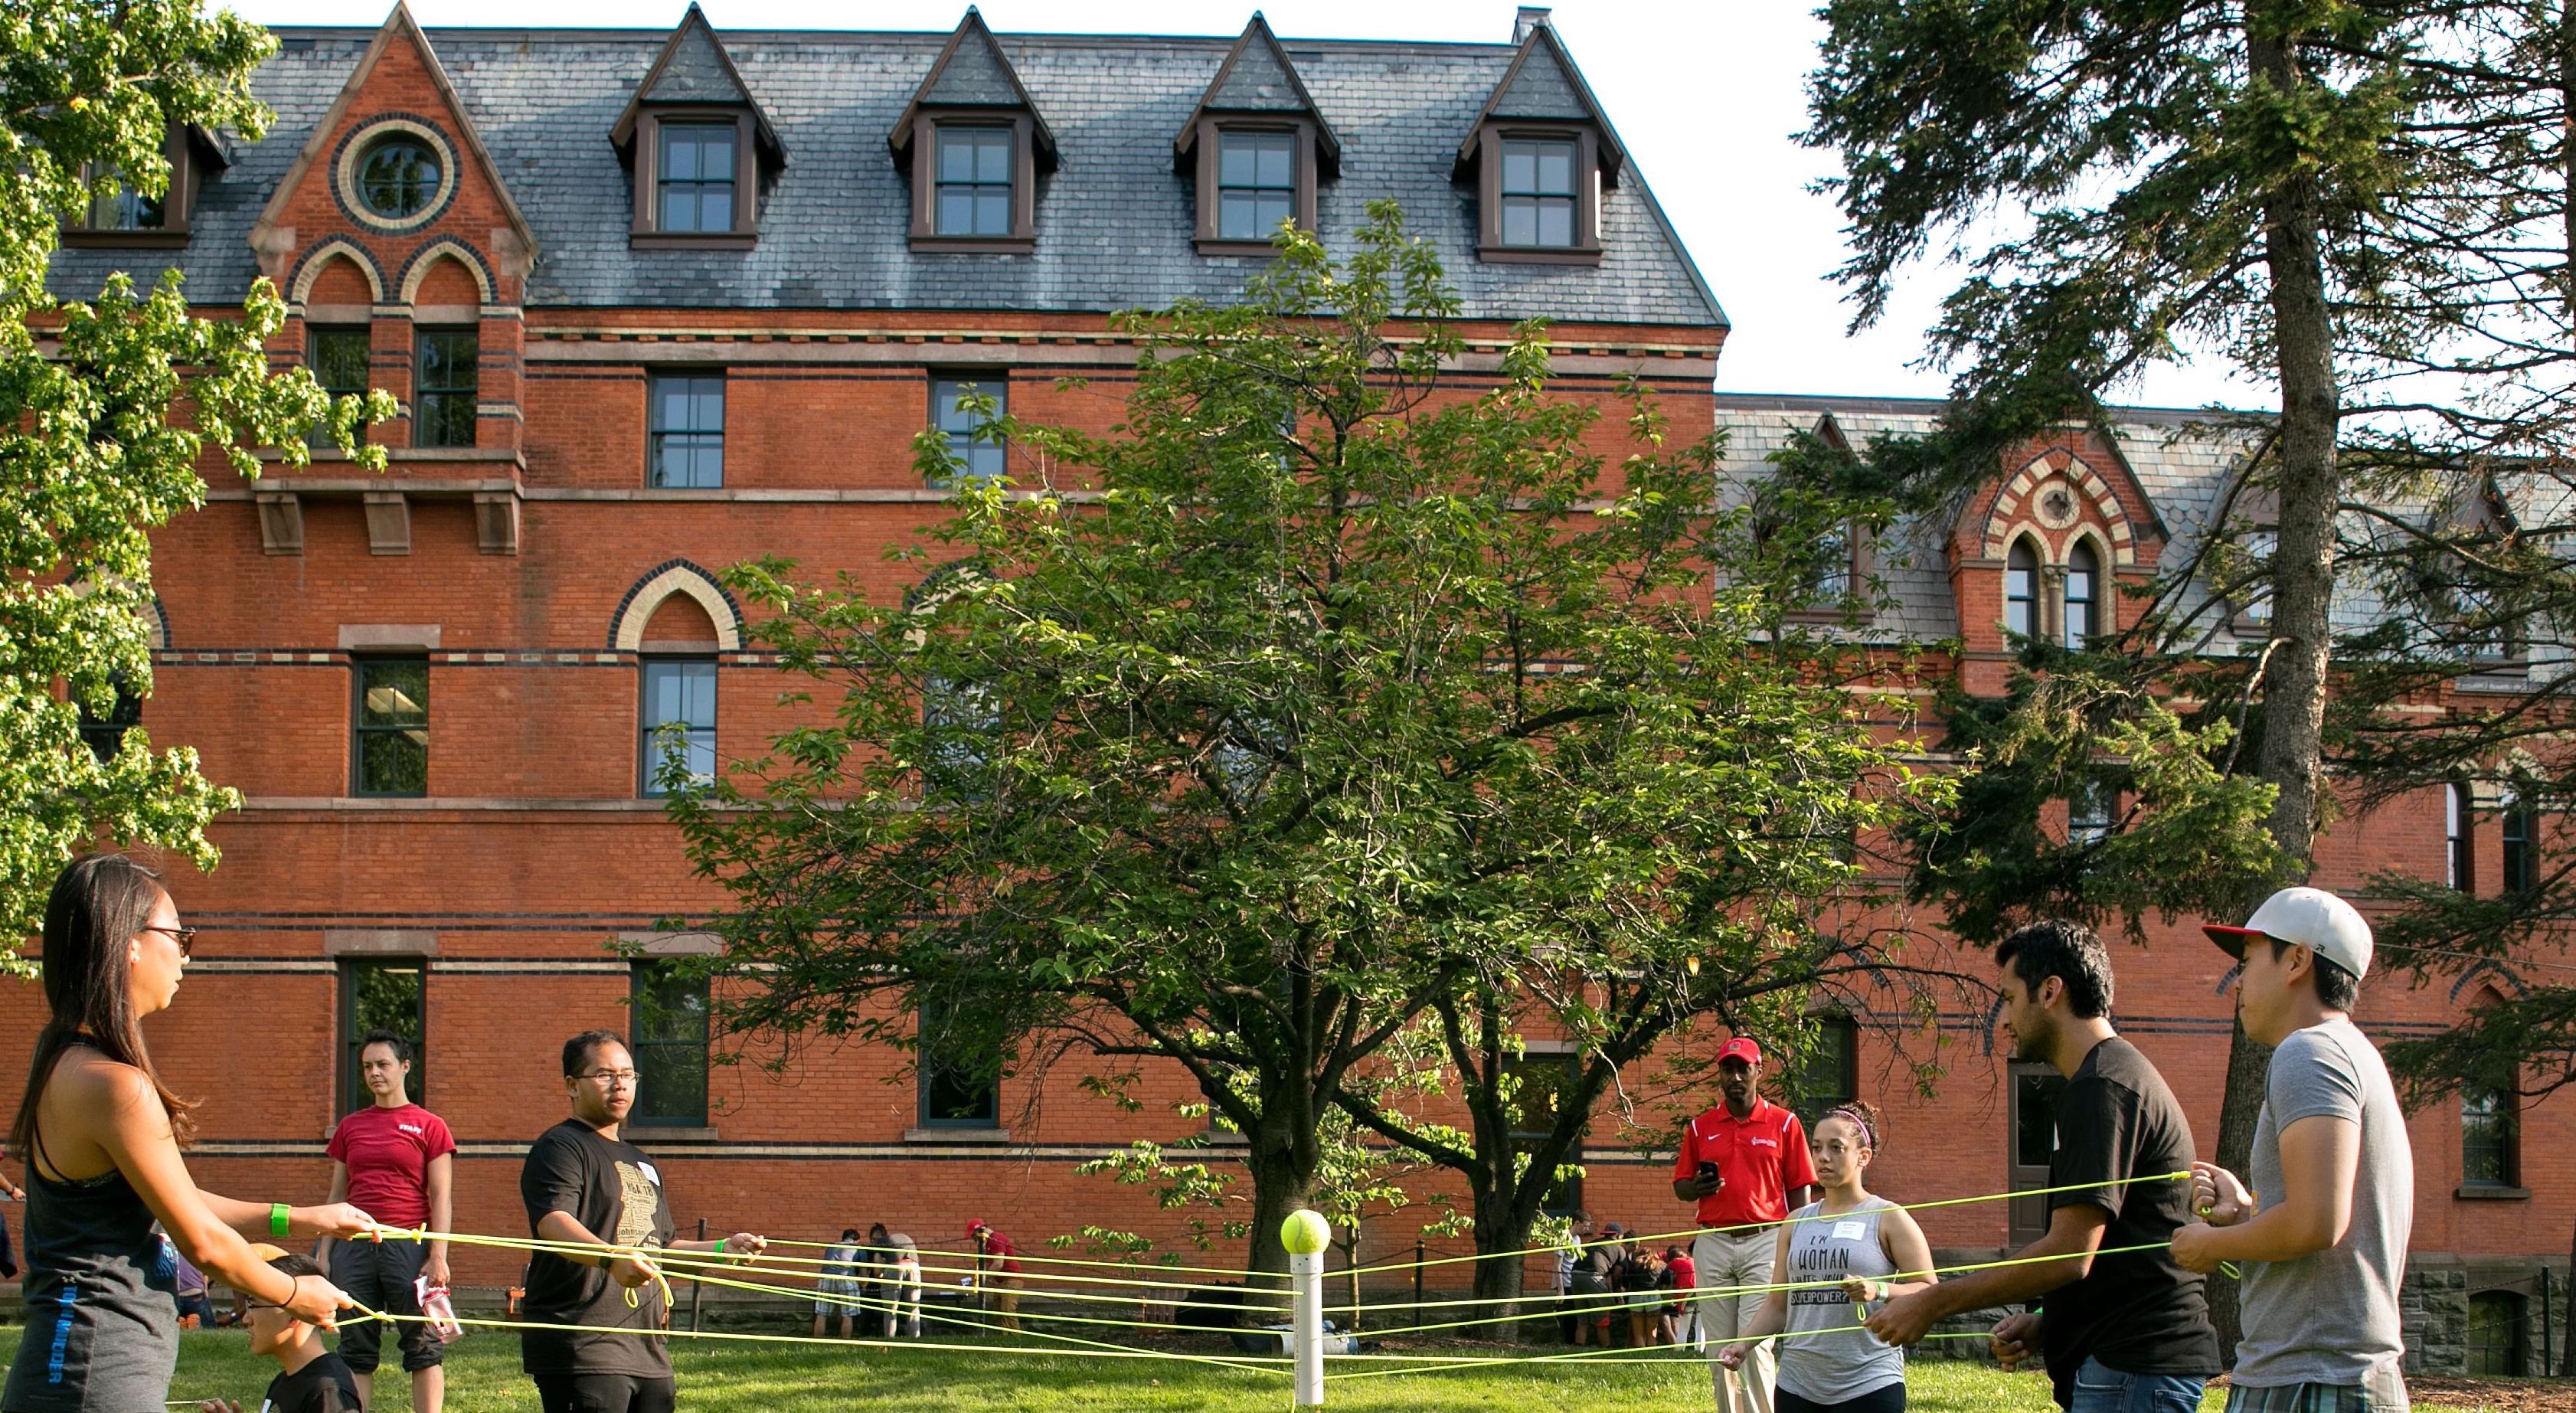 Students in front of brick building holding onto a string that connects to a balanced ball in the center 